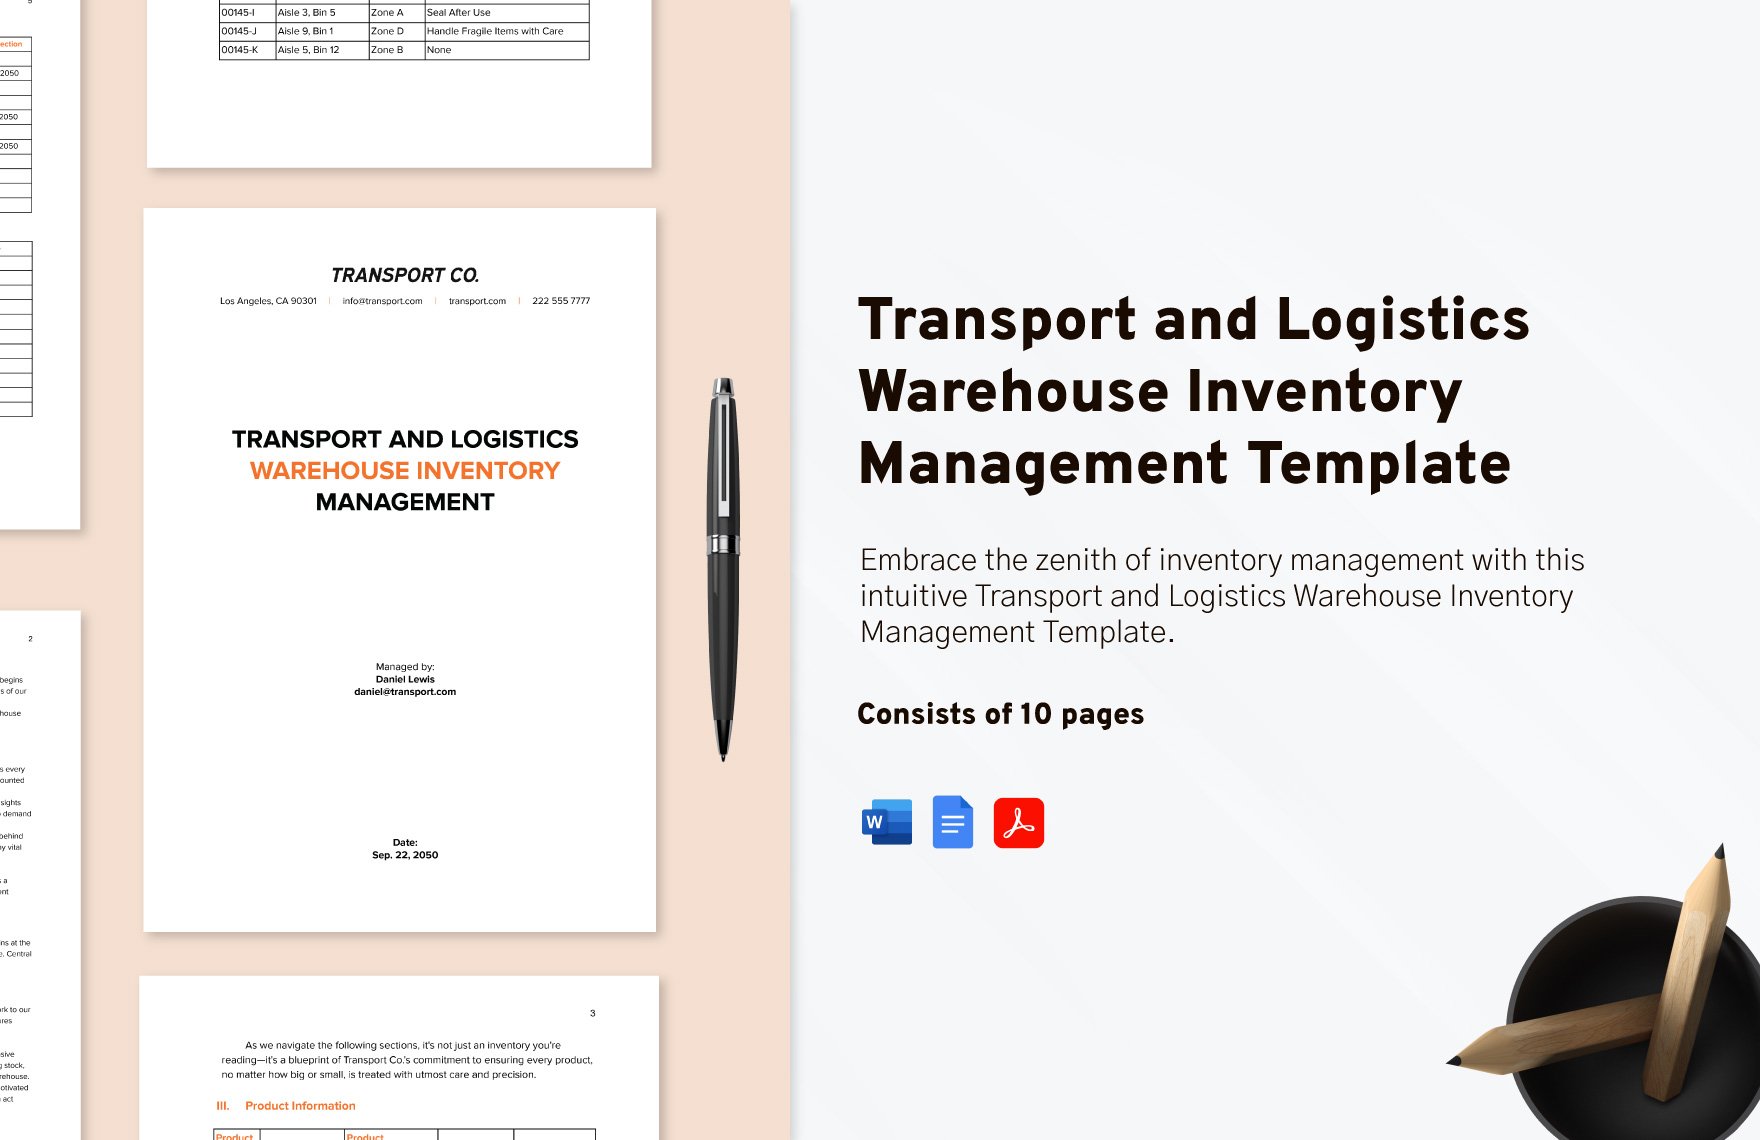 Transport and Logistics Warehouse Inventory Management Template